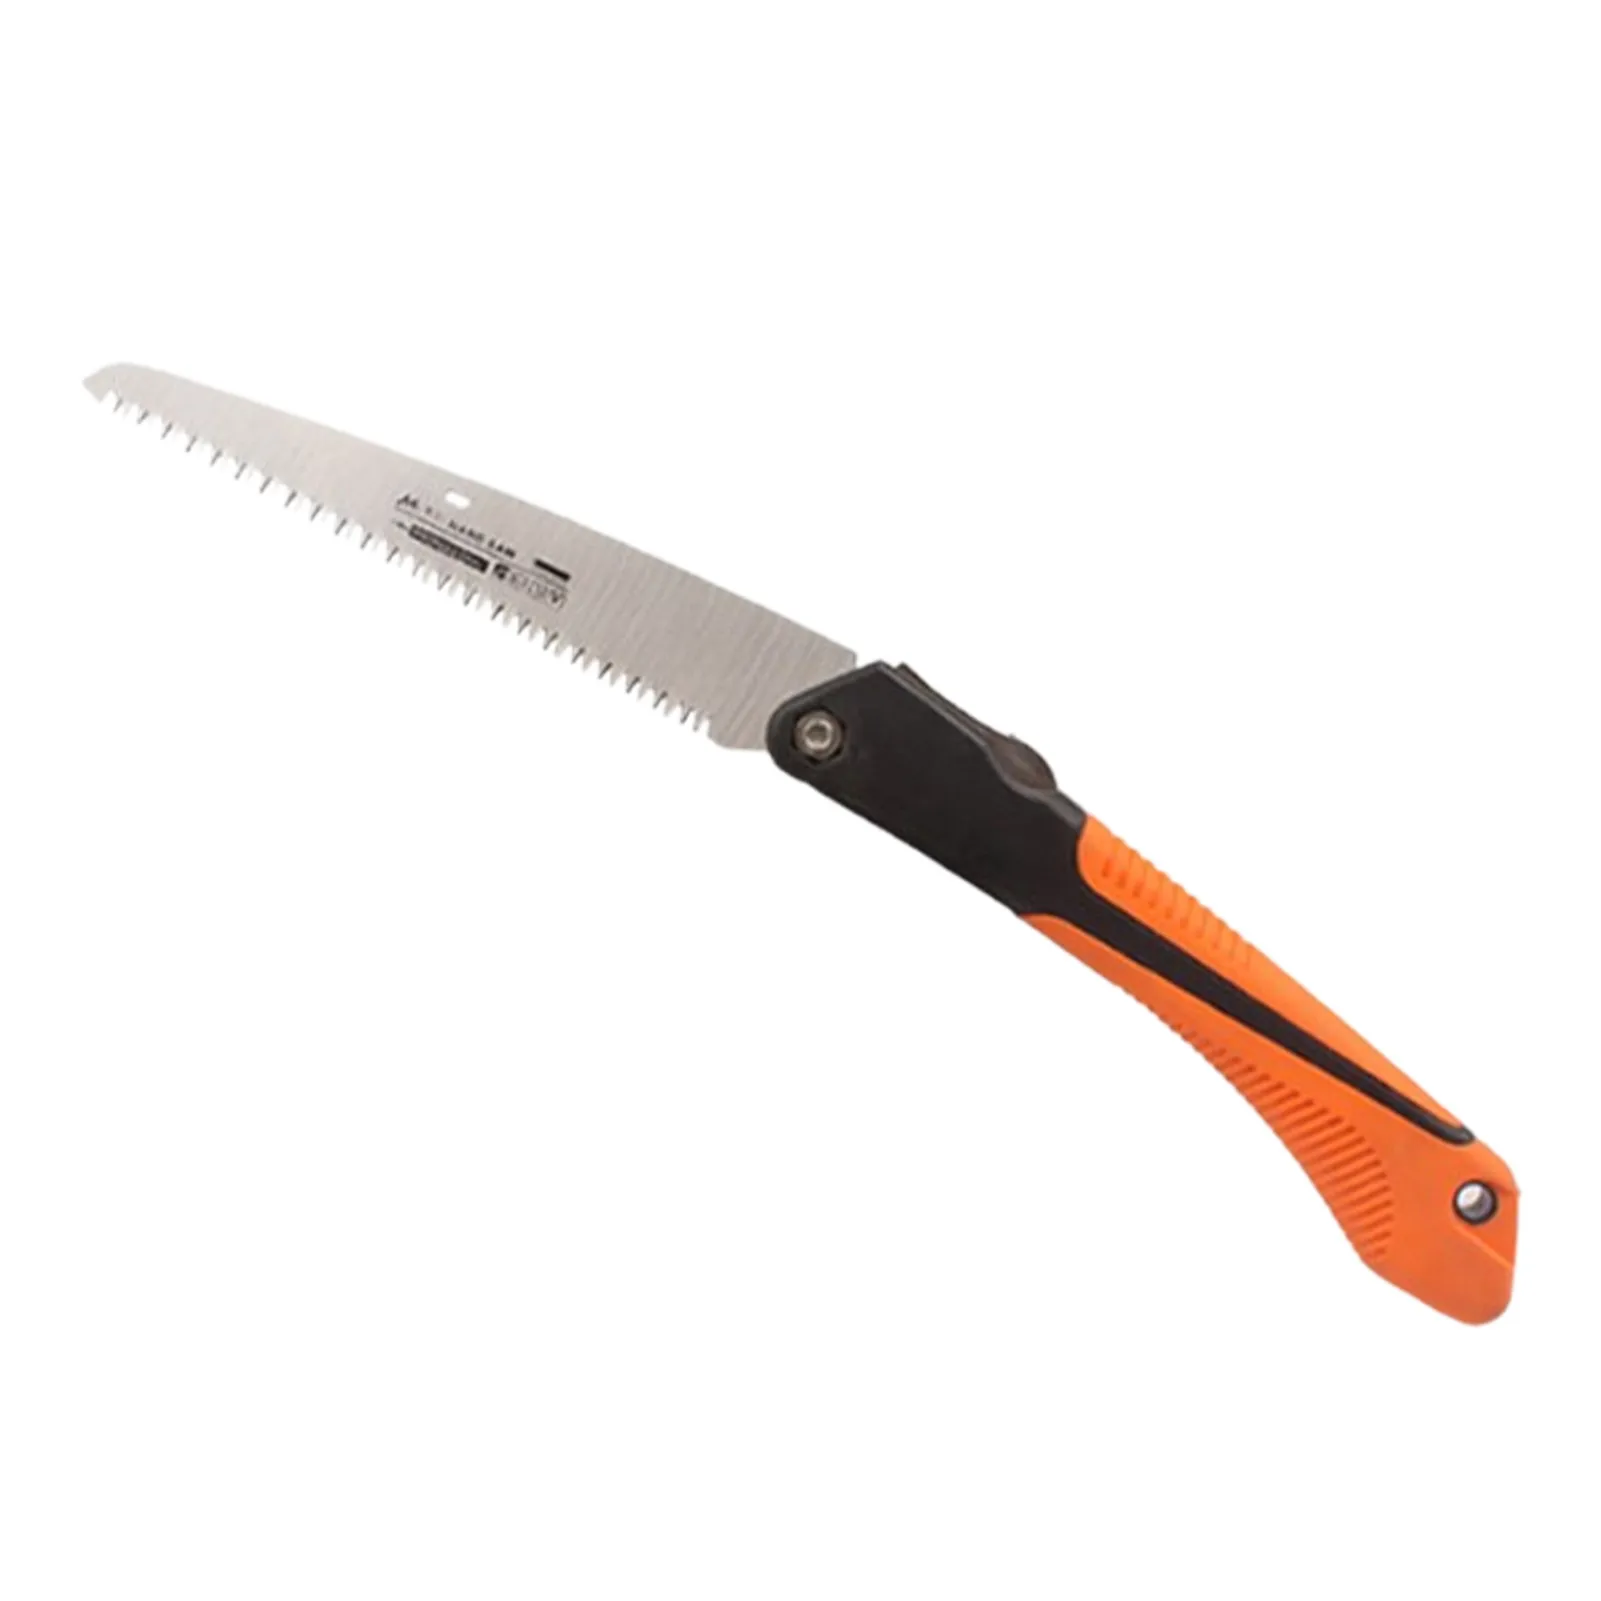 

Folding Bow Saw Folding Bow Saw Camping Pruning Saw With Ergonomic Non-slip Handle Camping Folding Saw With Rugged Blades